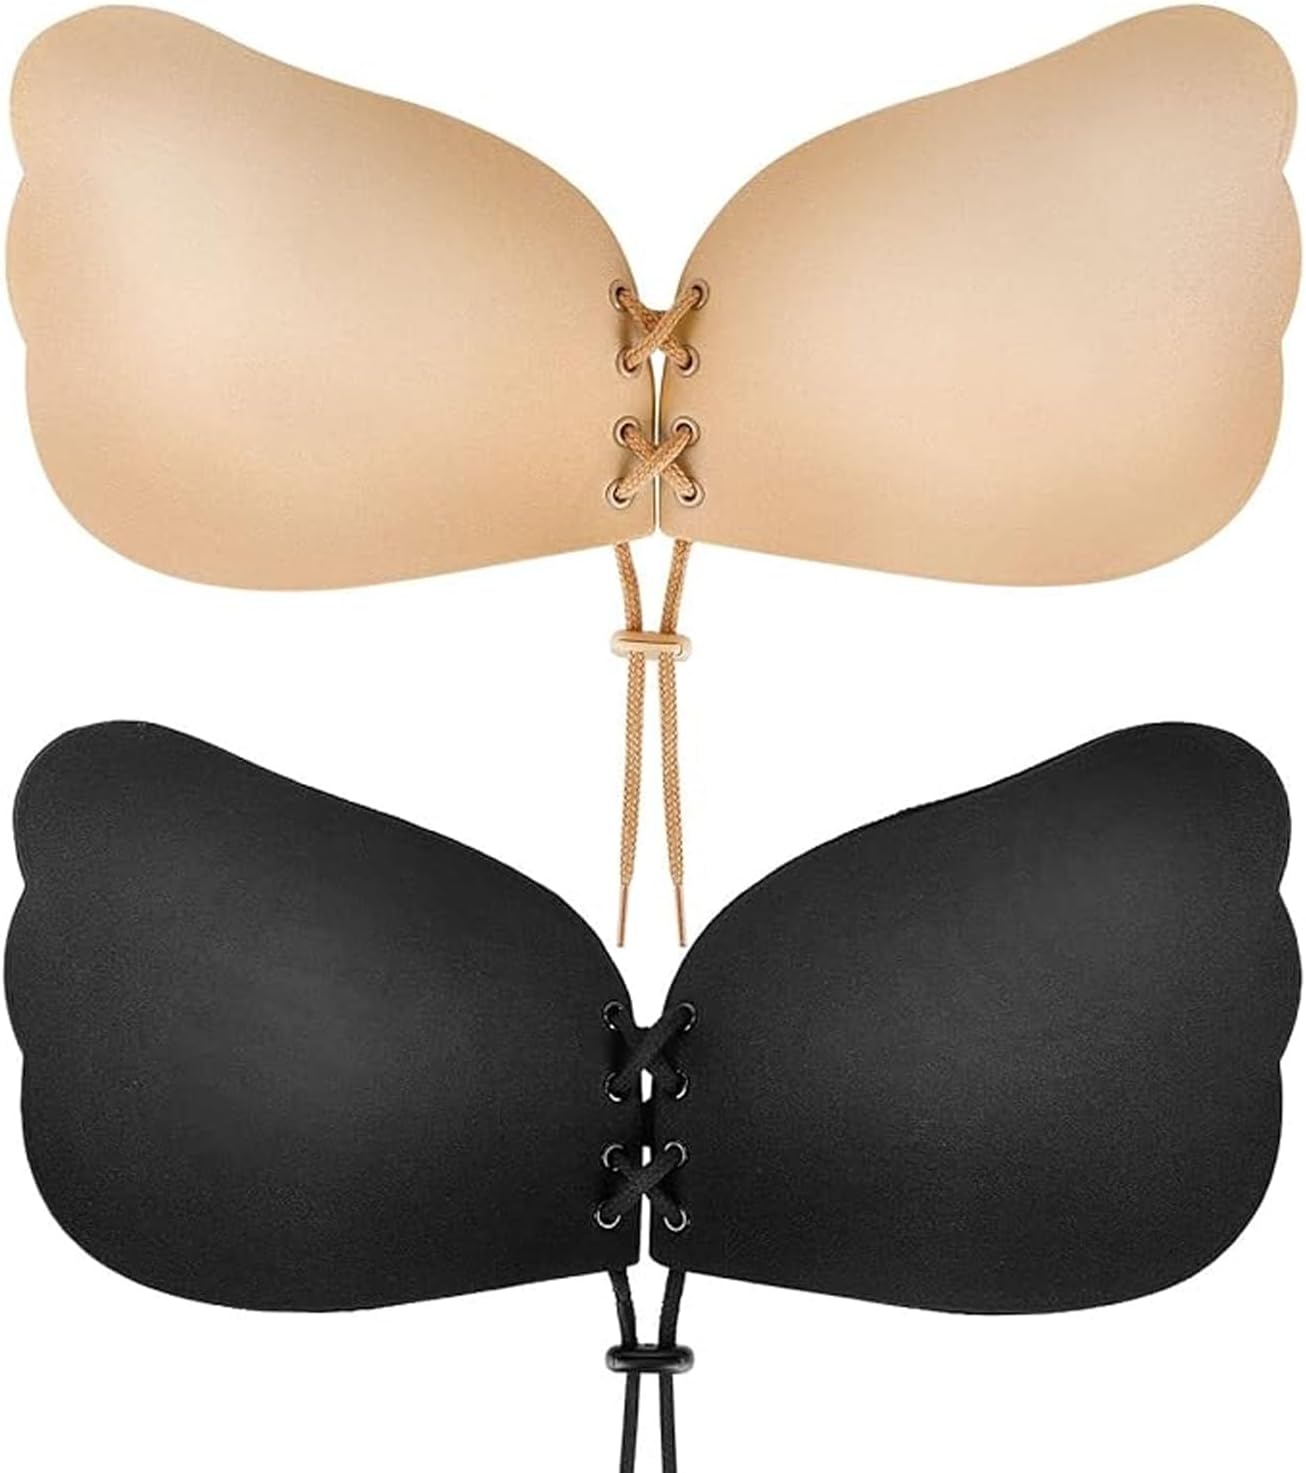 KERNFY Adhesive Bra丨Sticky Bra丨Strapless Invisible Push Up Self Adhesive Bra for Backless Dress